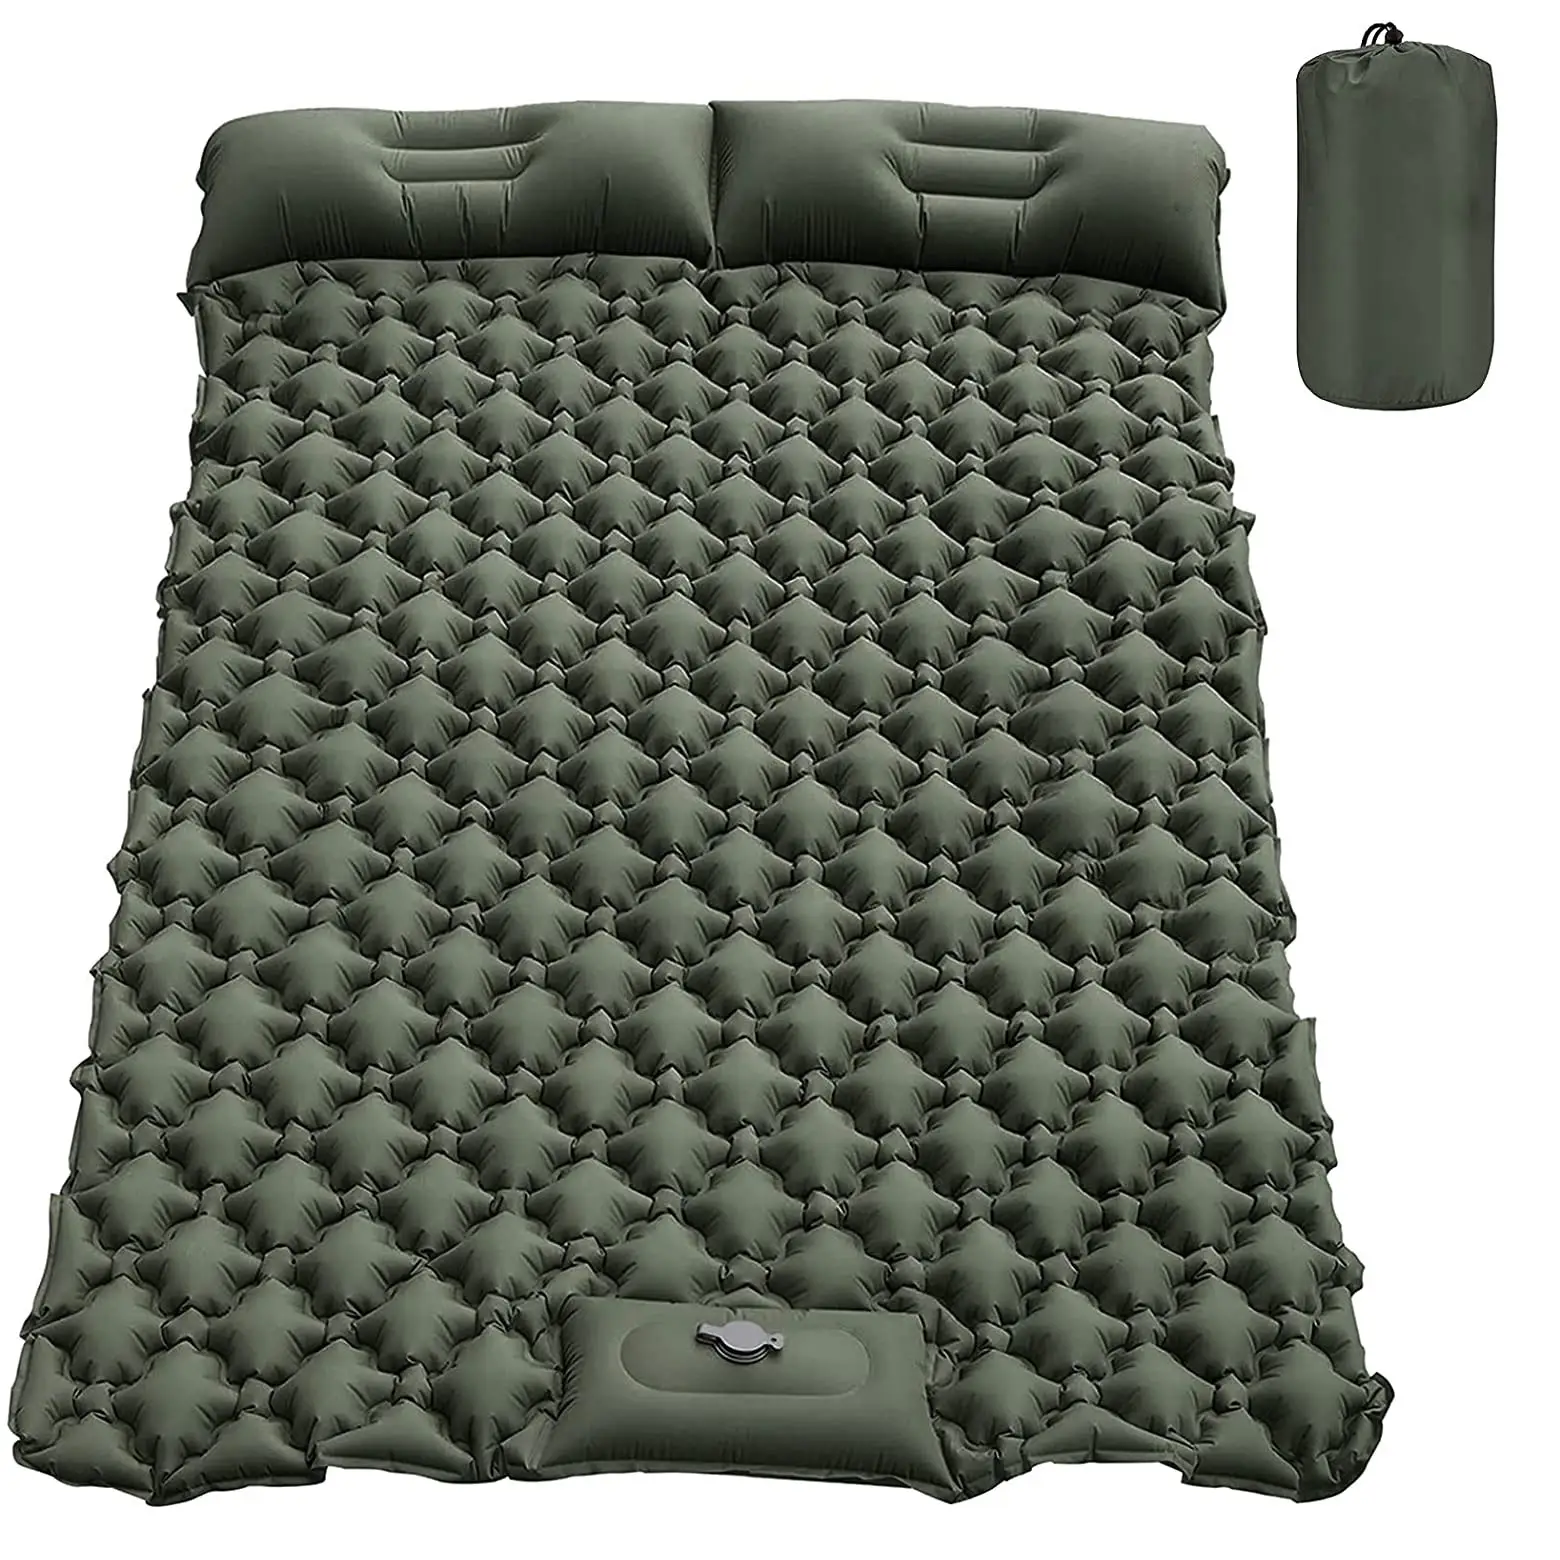 Factory Direct Supply Double Camping Sleeping Pad Built in Pump Camping Mattress Traveling Backpacking Hiking Tent Mat